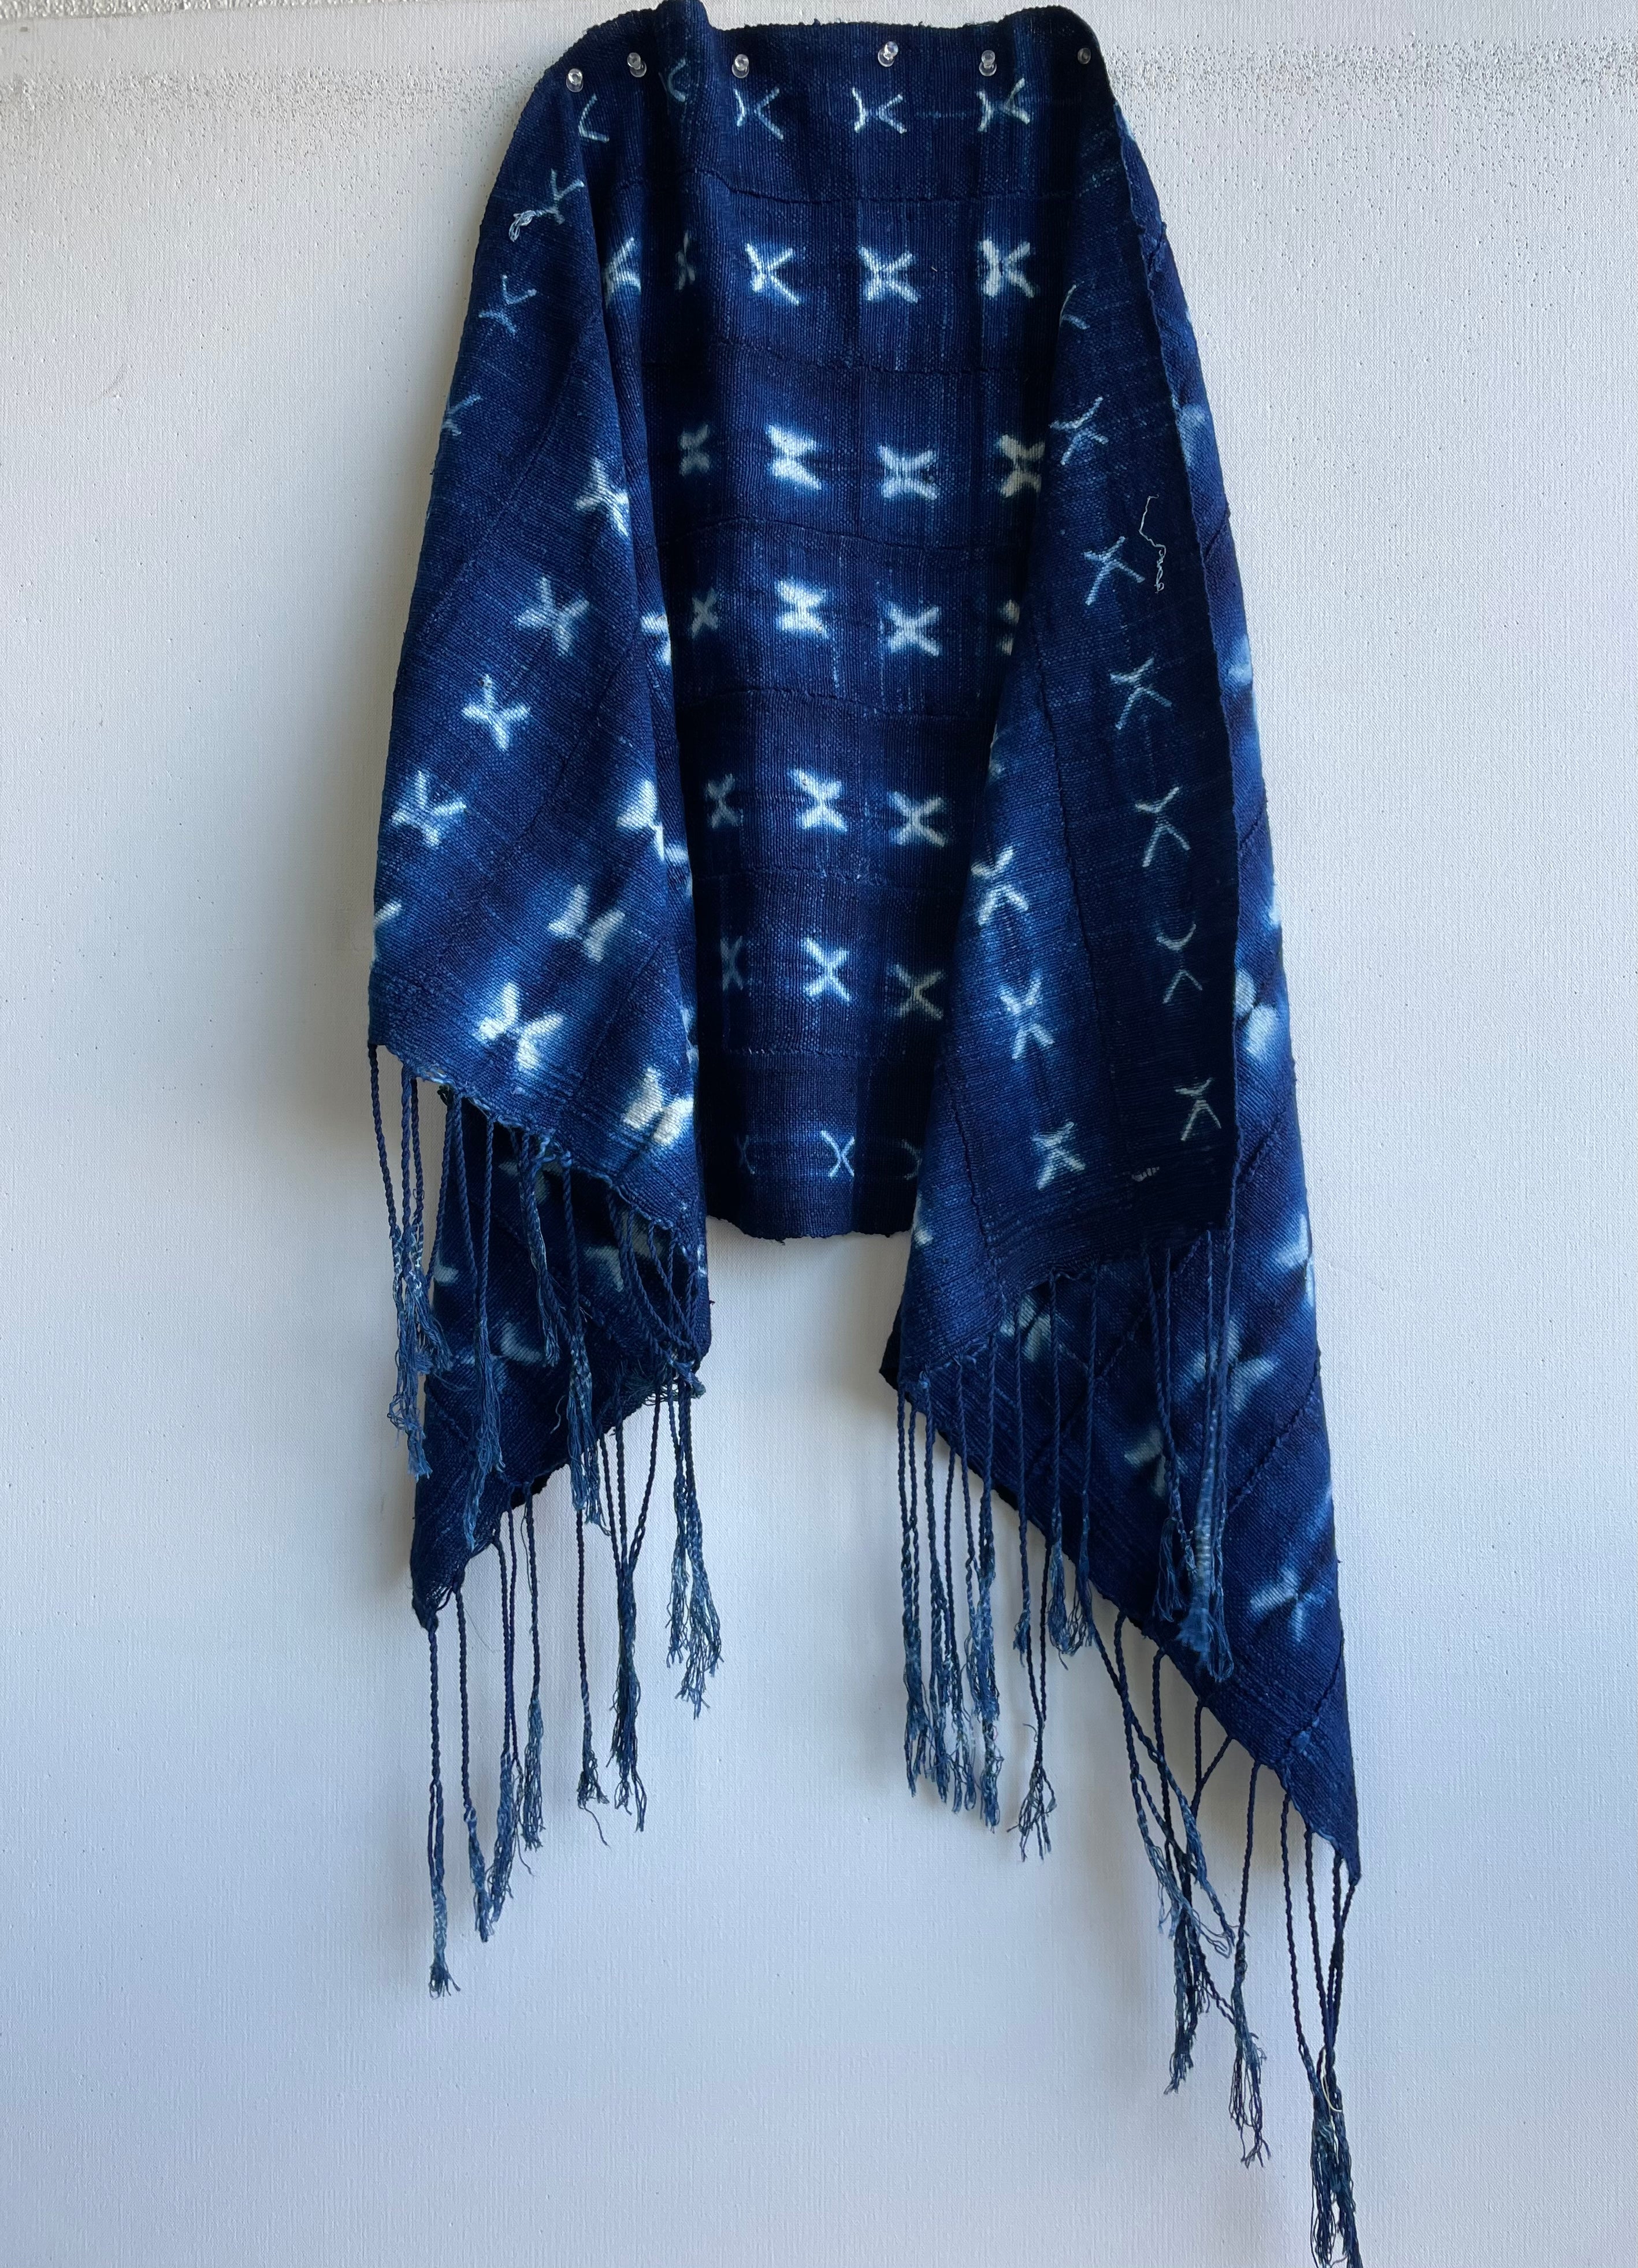 Handcrafted Textiles - Artisan Designed - Handcrafted African Art Textiles - Home Decor - Living Spaces - Mix Colors - Bold Patterns - Traditional Designs - African Culture - Craft a bohemian-inspired look with this vintage African indigo Tie Dyed Blue Cotton Textile Scarf. Made with lightweight cotton fabric, this scarf is stylish and timeless, featuring classic fringed edges for a touch of elegance. Whether layered or worn alone, this unique scarf is a perfect addition to any wardrobe